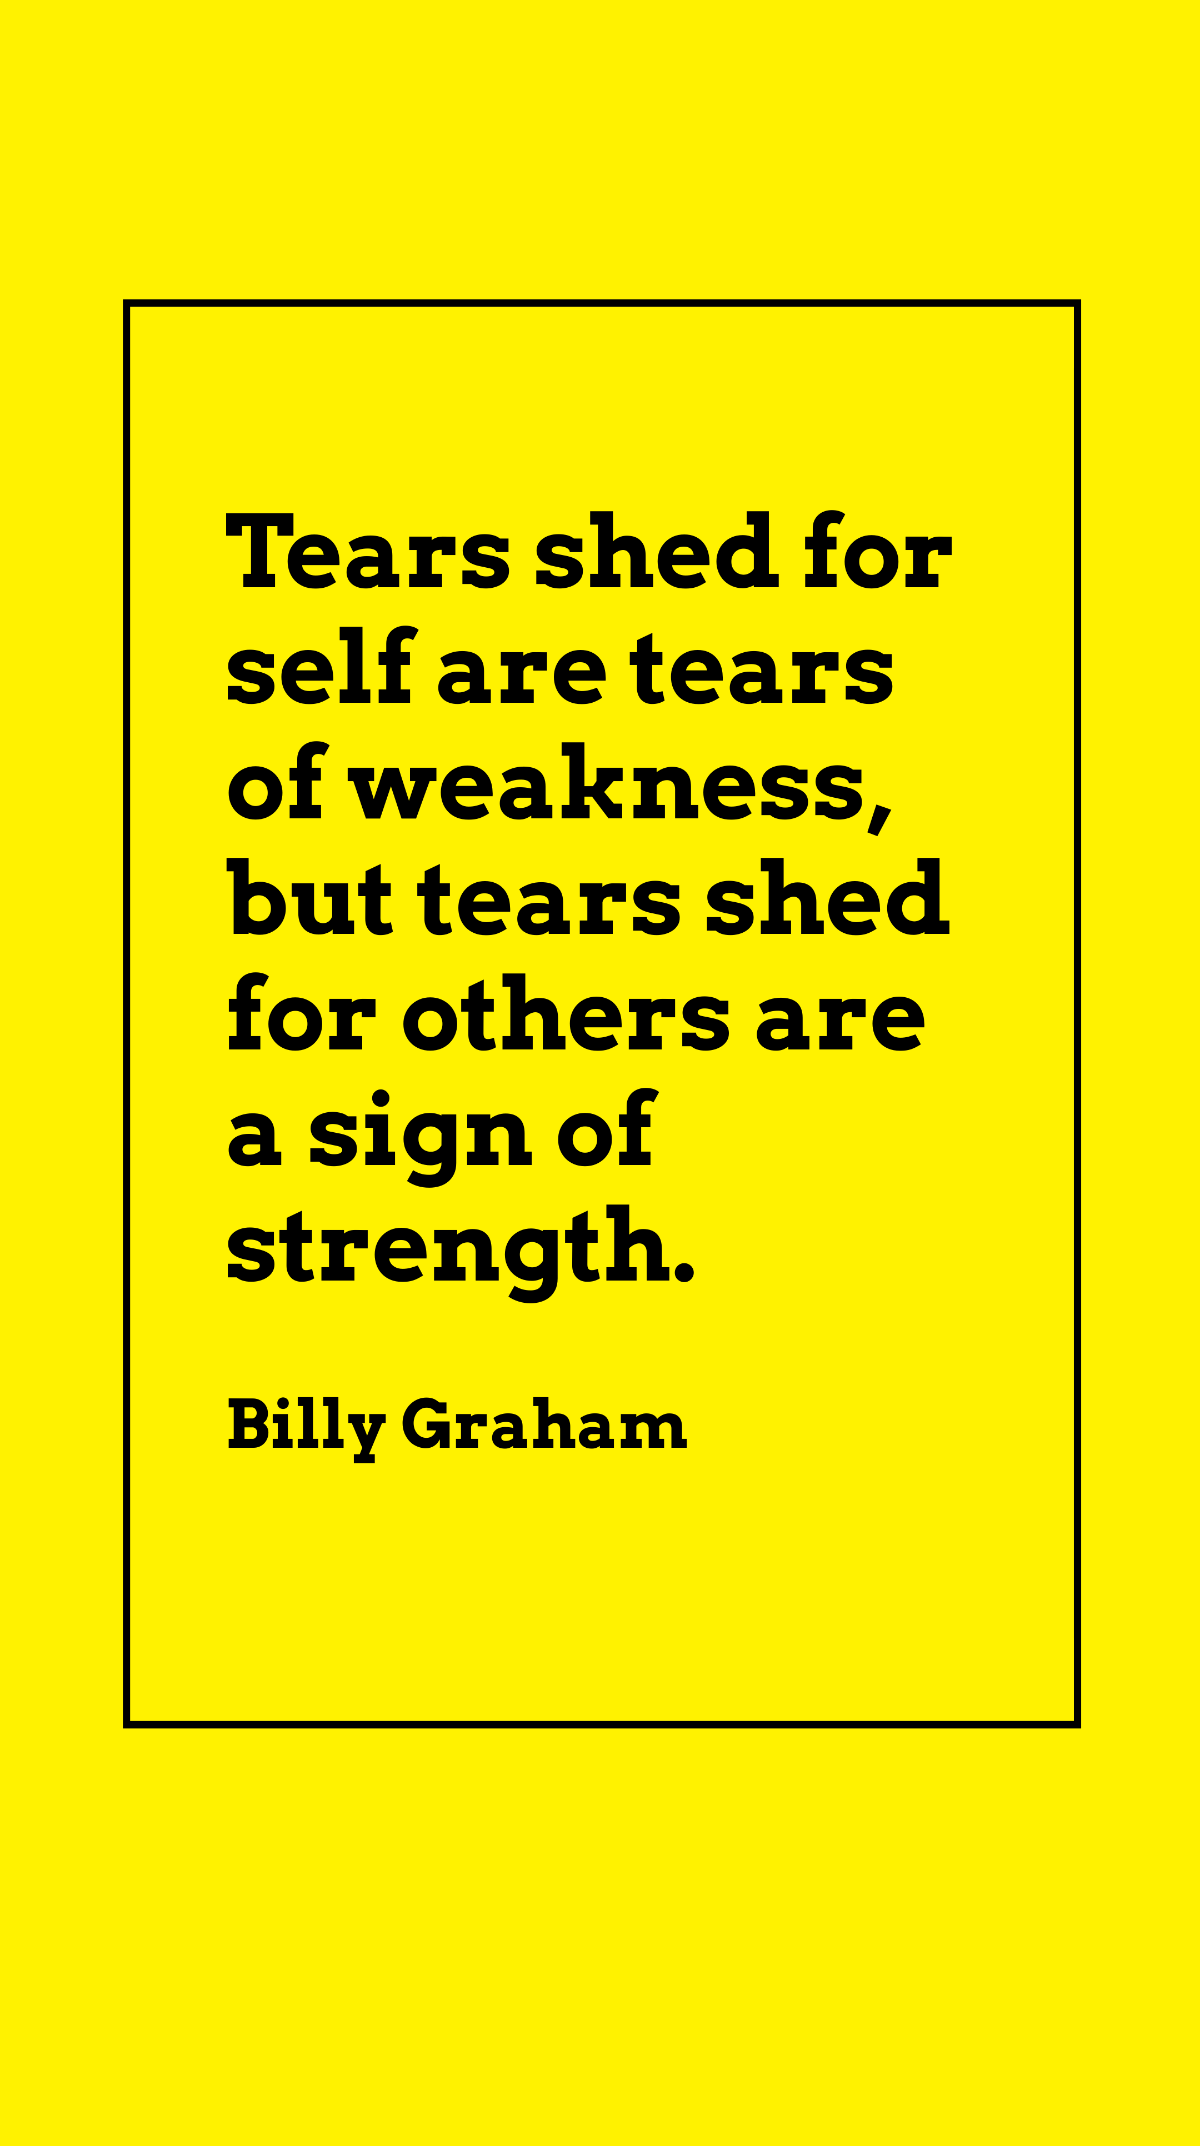 Billy Graham - Tears shed for self are tears of weakness, but tears shed for others are a sign of strength. Template